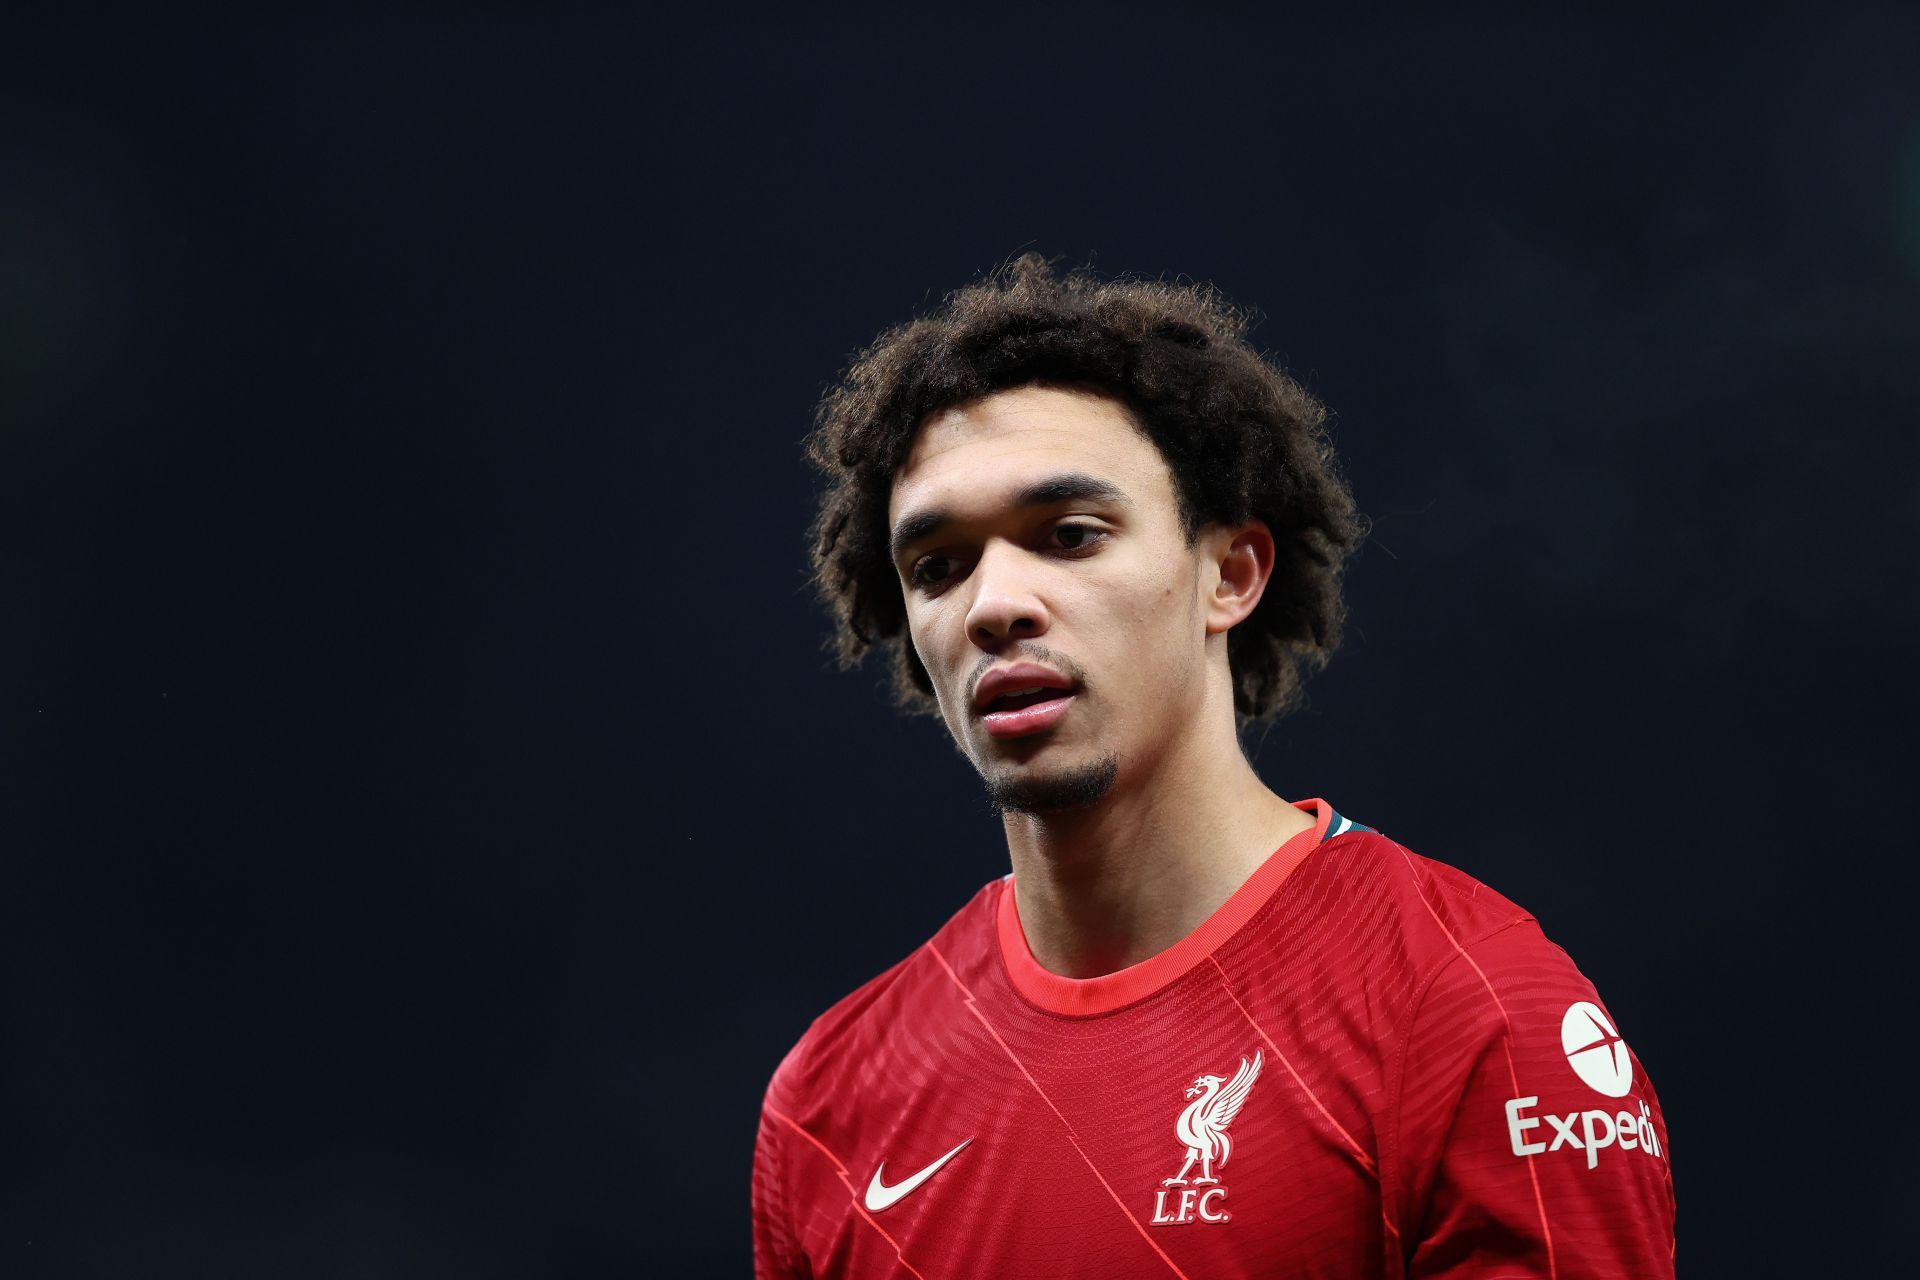 Trent Alexander-Arnold is arguably the best right-back in the world right now